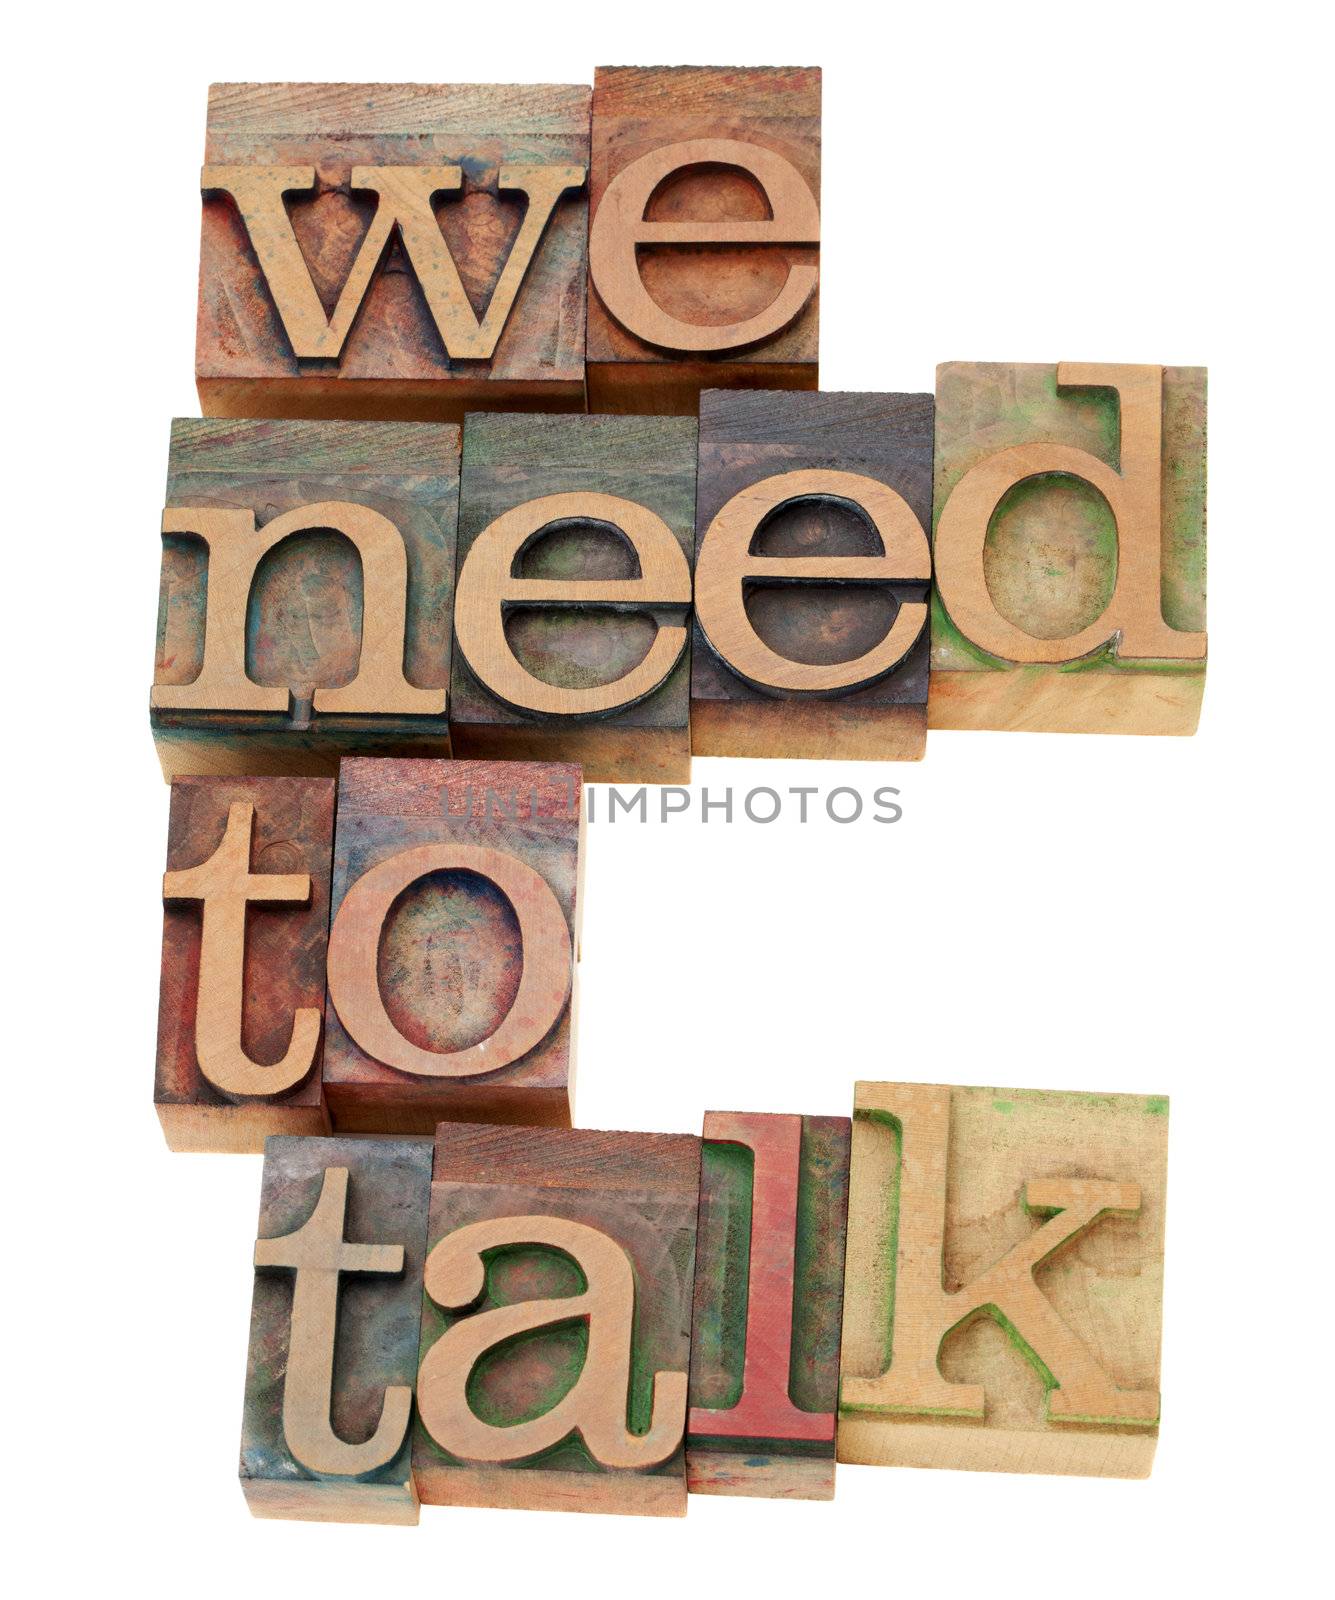 we need to talk request - isolated text in vintage wood letterpress printing blocks